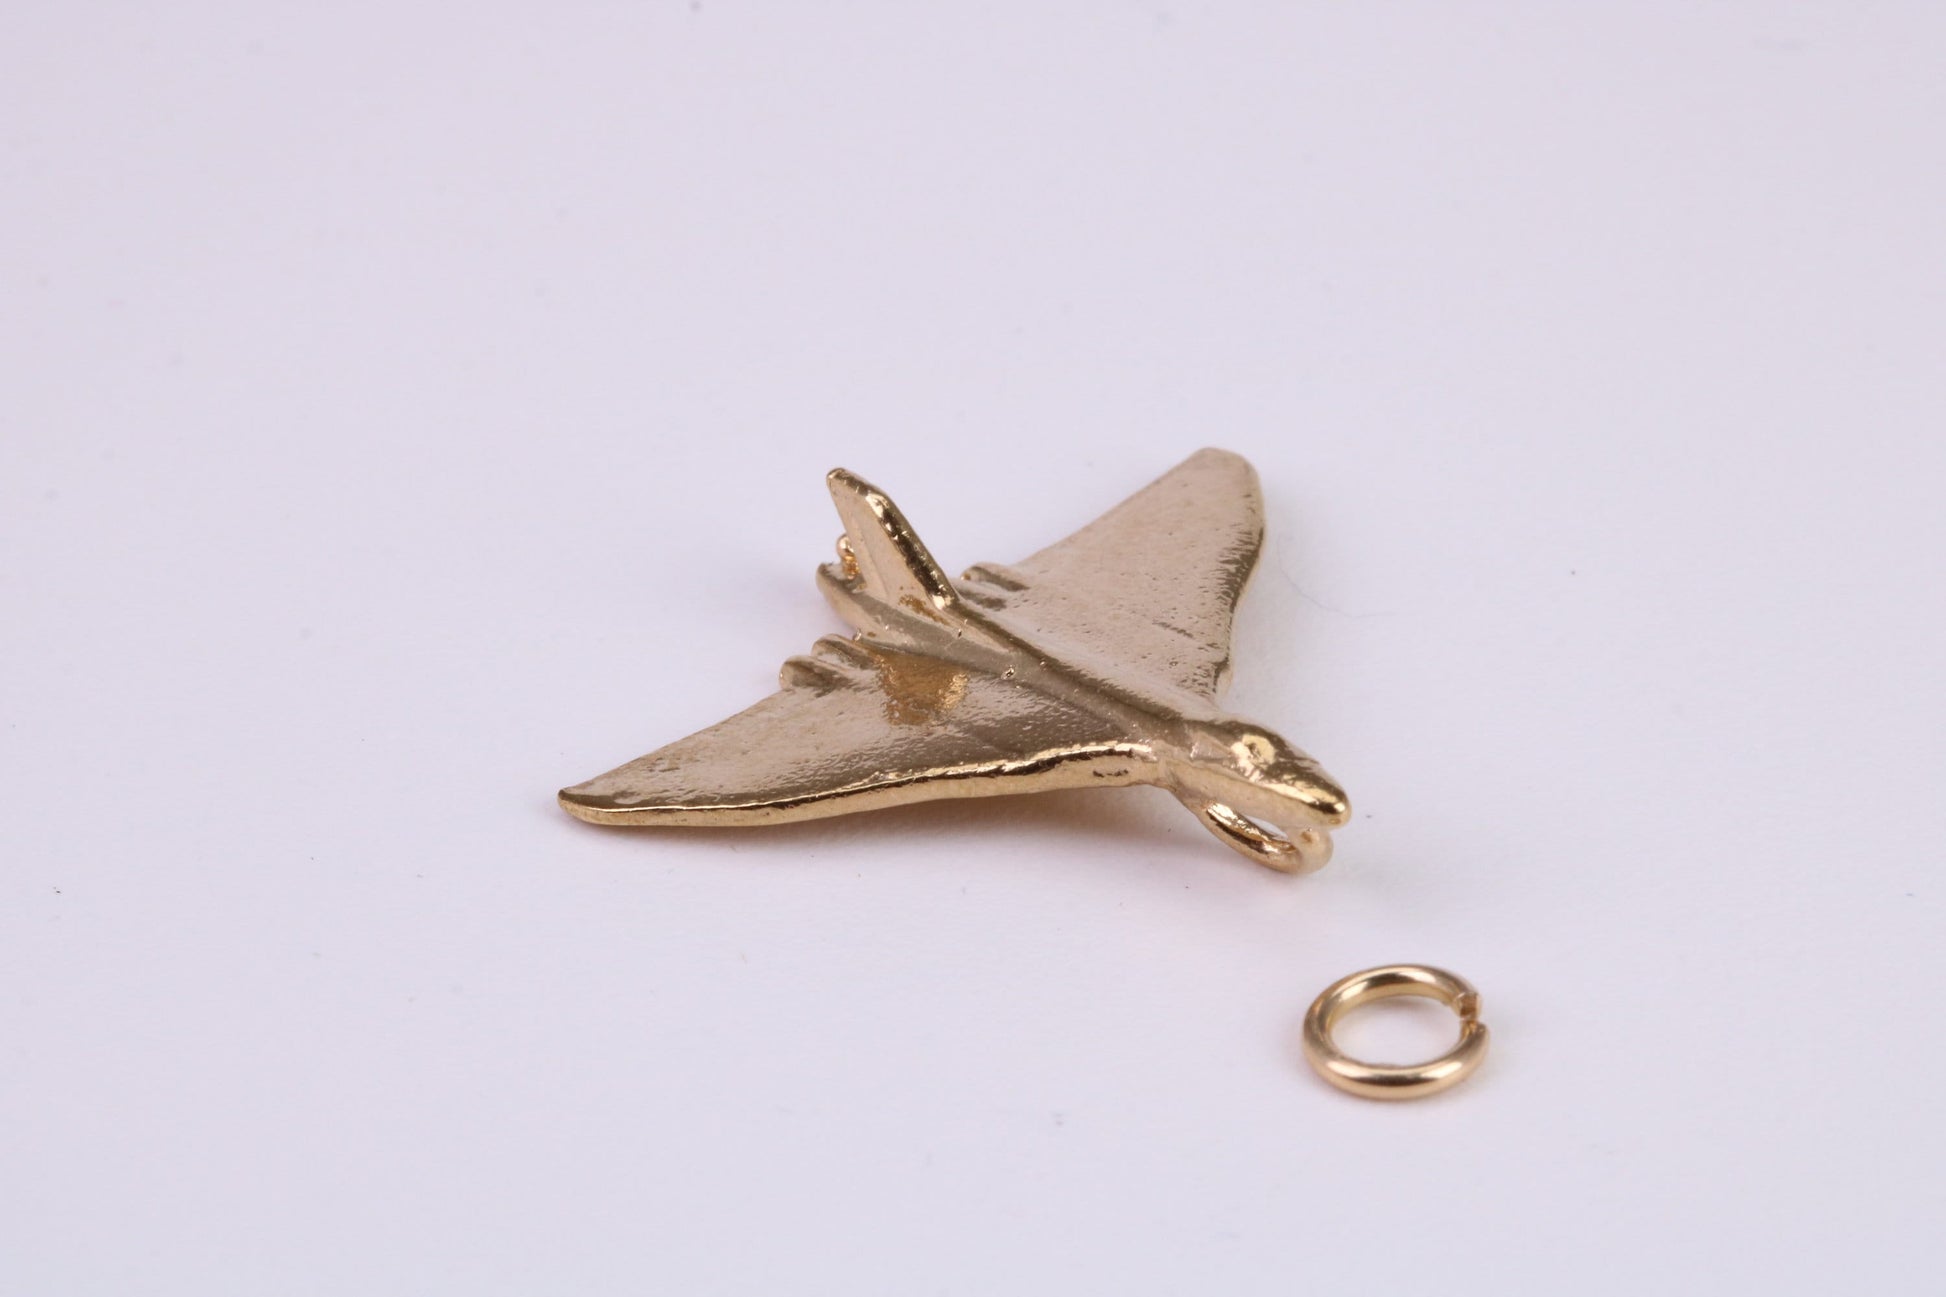 Vulcan Bomber Airplane Charm, Traditional Charm, Made From Solid Yellow Gold with British Hallmark, Complete with Attachment Link